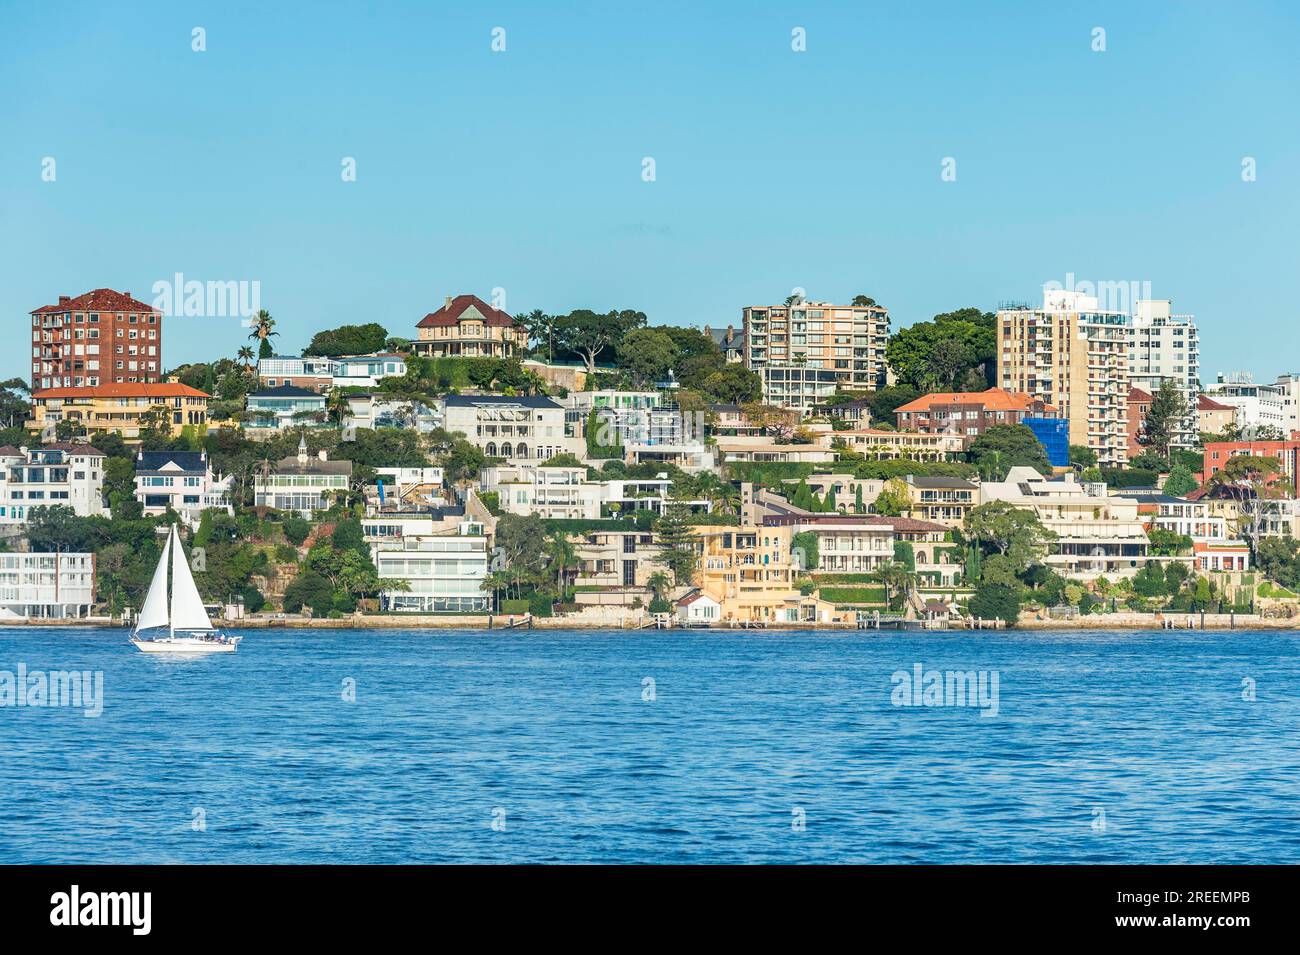 District of Vaucluse, Sydney, New South Wales, Australia Stock Photo